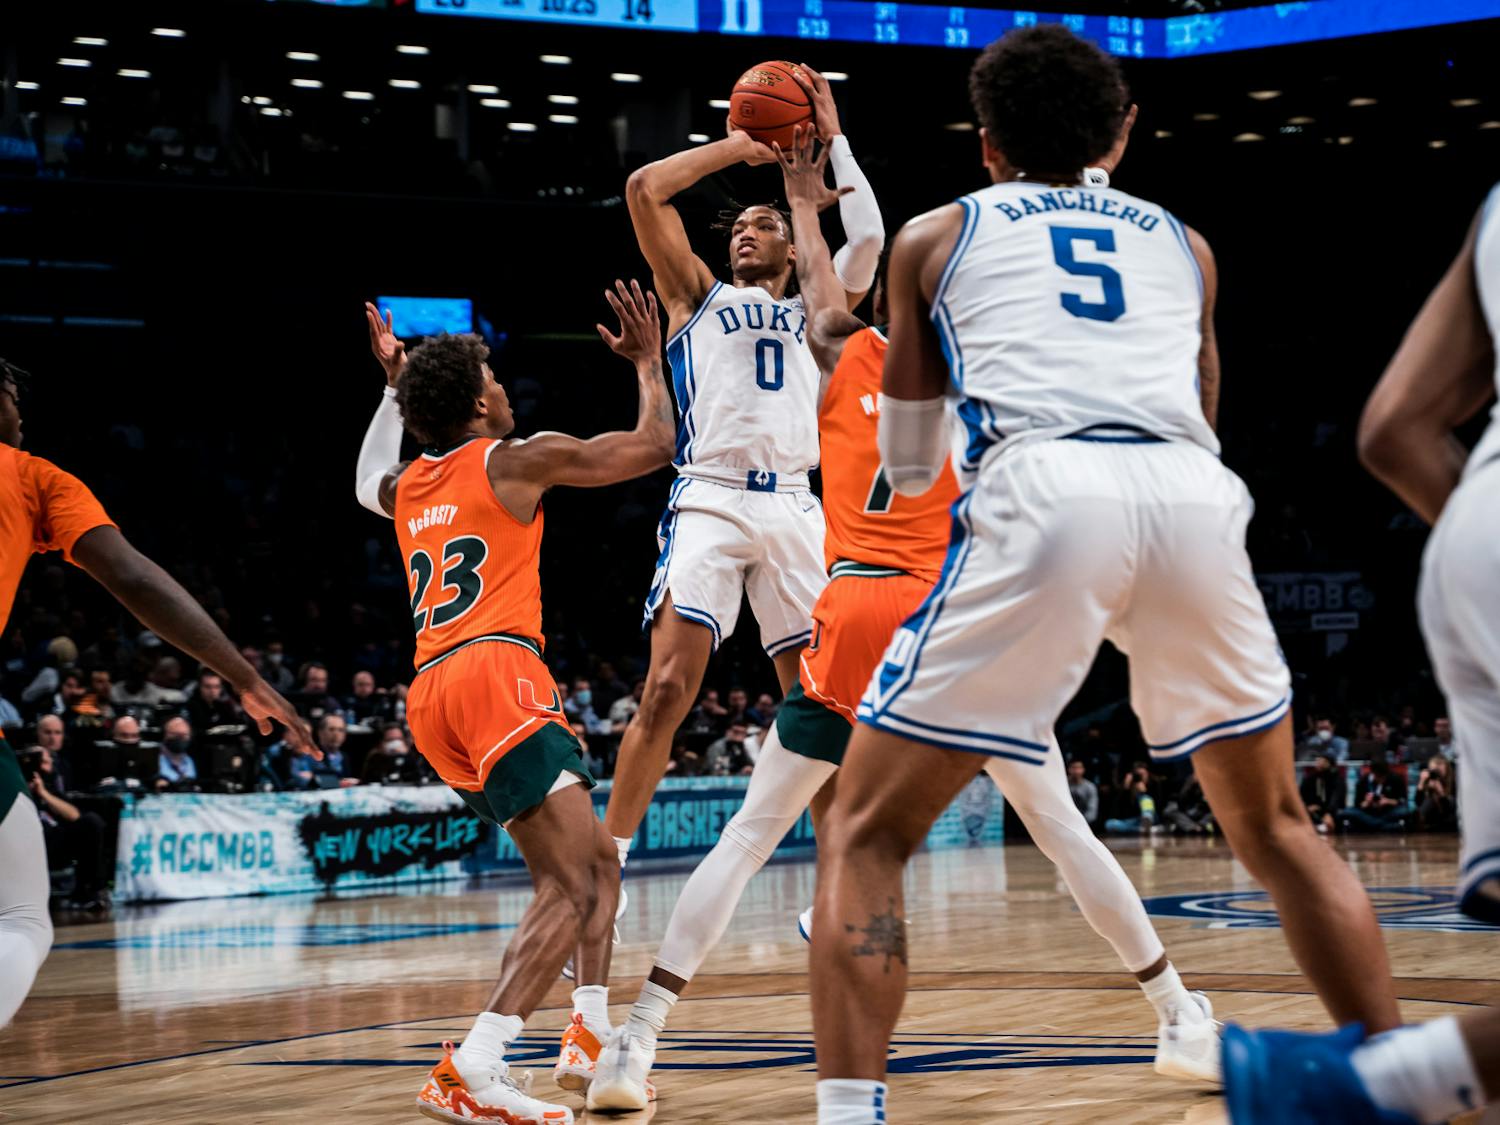 Wendell Moore Jr. took over late against Miami to help Duke advance to the championship game of the ACC tournament.